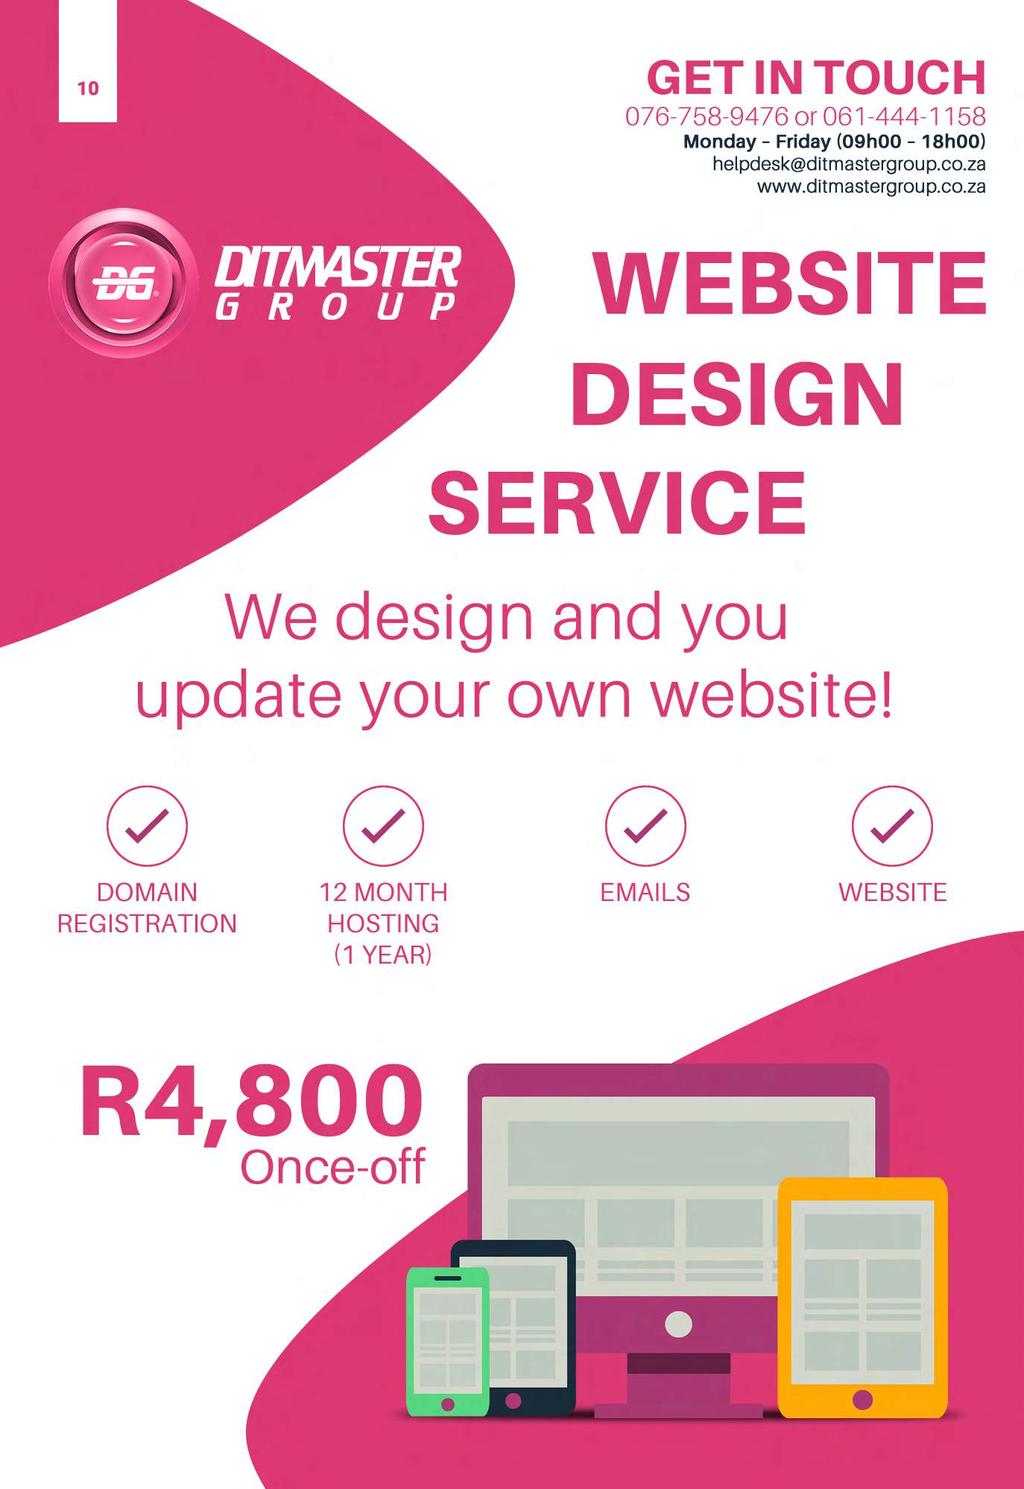 10 G E T I N T O U C H 0 7 6-7 5 8-9 4 7 6 o r 0 6 1-4 4 4-1 1 5 8 Monday Friday (09h00 18h00) helpdesk@ditmastergroup.co.